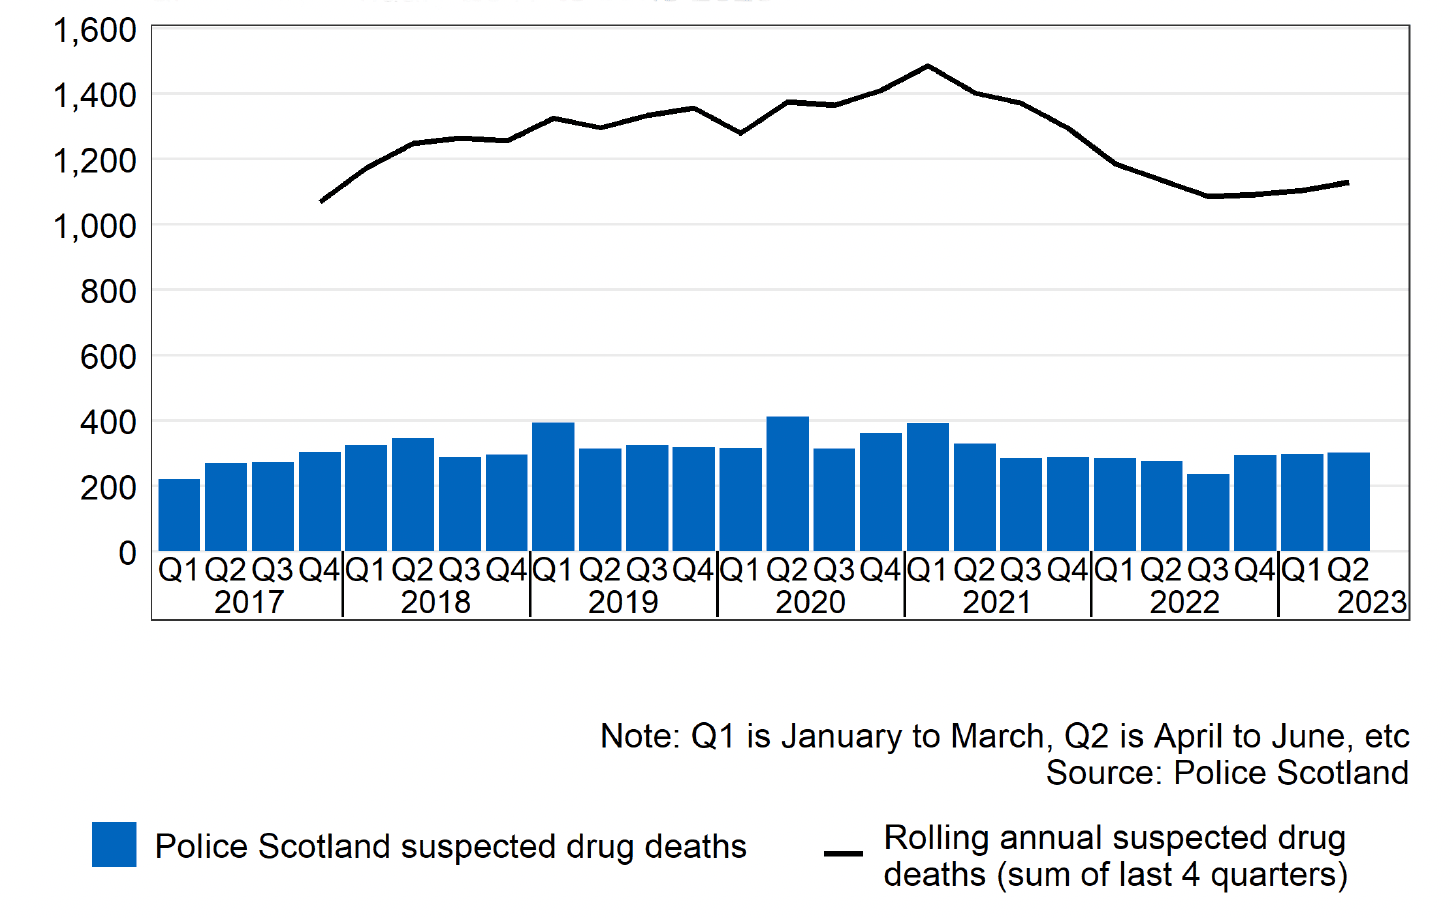 Bar chart showing the number of suspected drug deaths each calendar year quarter with line graph showing rolling annual suspected drug death (sum of latest 4 quarters). Chart shows an increasing trend in the rolling annual total suspected drug deaths from October to December 2017, reaching a peak in October to December 2020 before following a decreasing trend from early 2021 to July to September 2022, then flattening out over the three most recent calendar quarters.